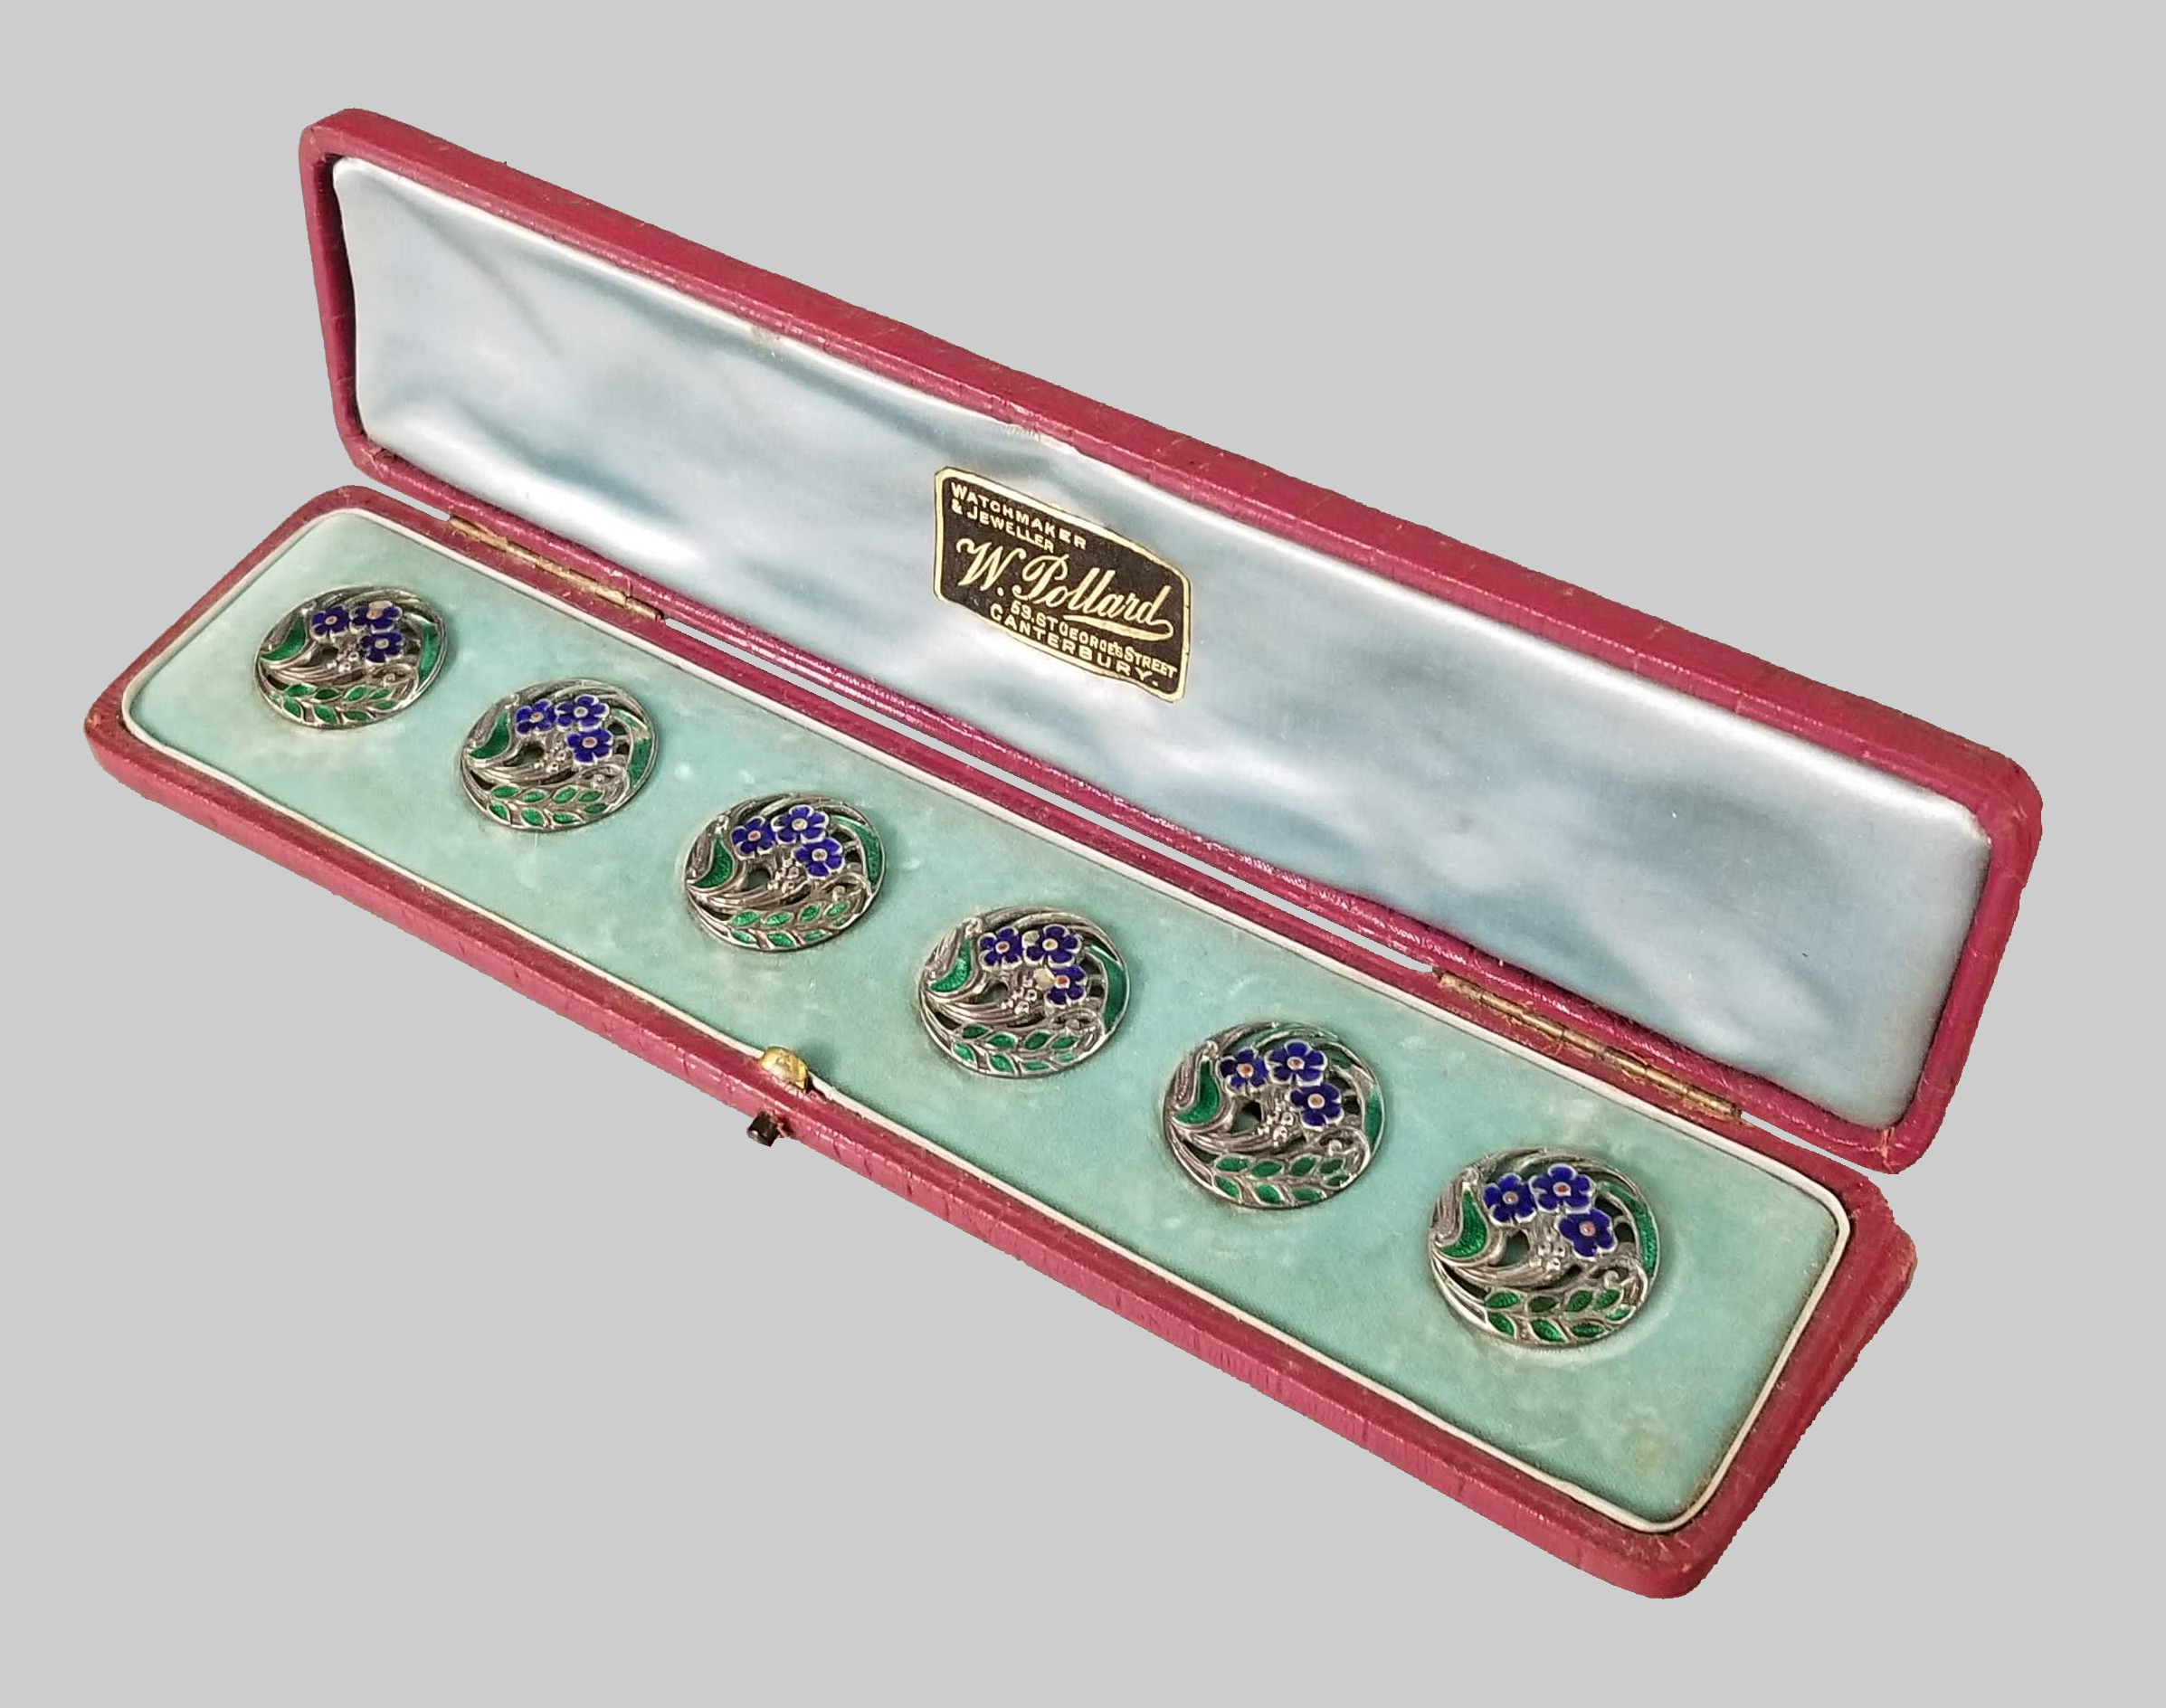 Fig. 4b - Harry Synyer and Charles Joseph Beddoes, Buttons with Forget-me-nots, 1900, sterling silver and enamel, TRRF Collection.